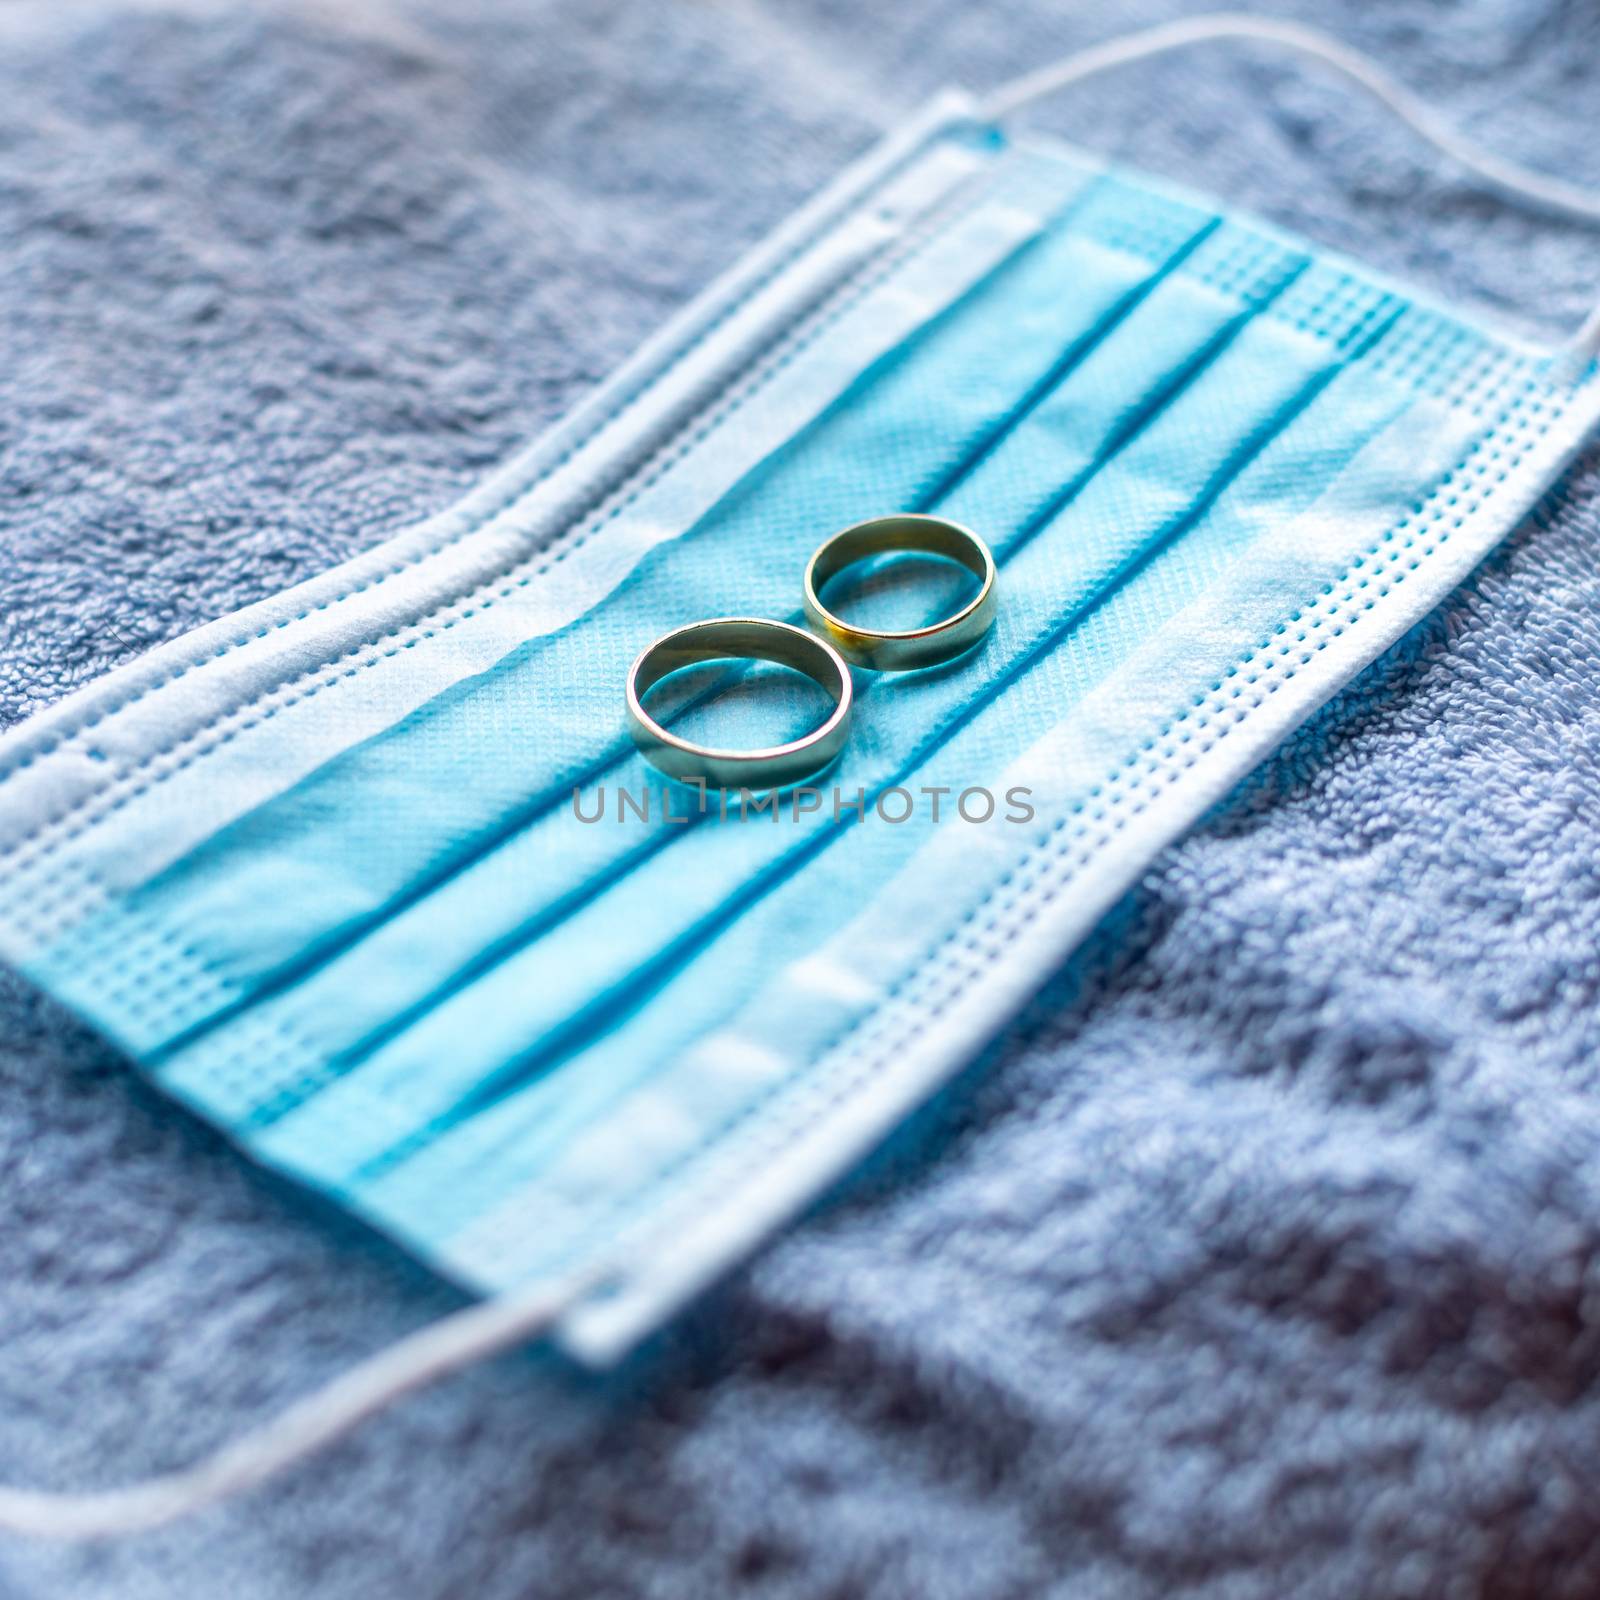 Wedding rings with surgical mask facemask - wedding and divorce metaphor in covid-19 pandemic time